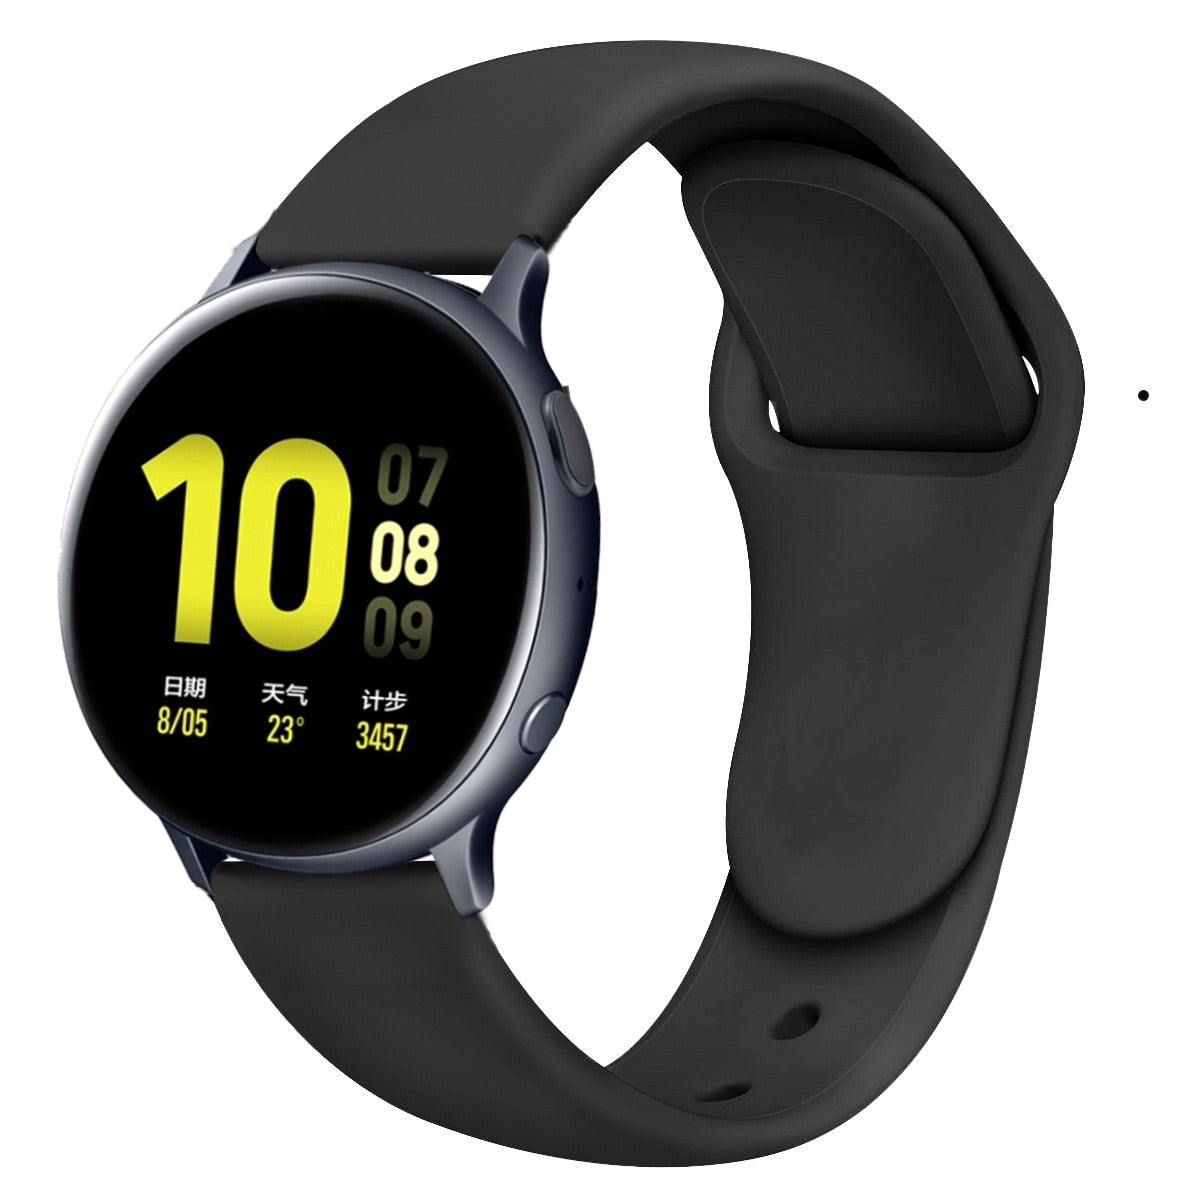 Silicone bands for Samsung Galaxy, Huawei, and Amazfit watch - Wristwatchstraps.co